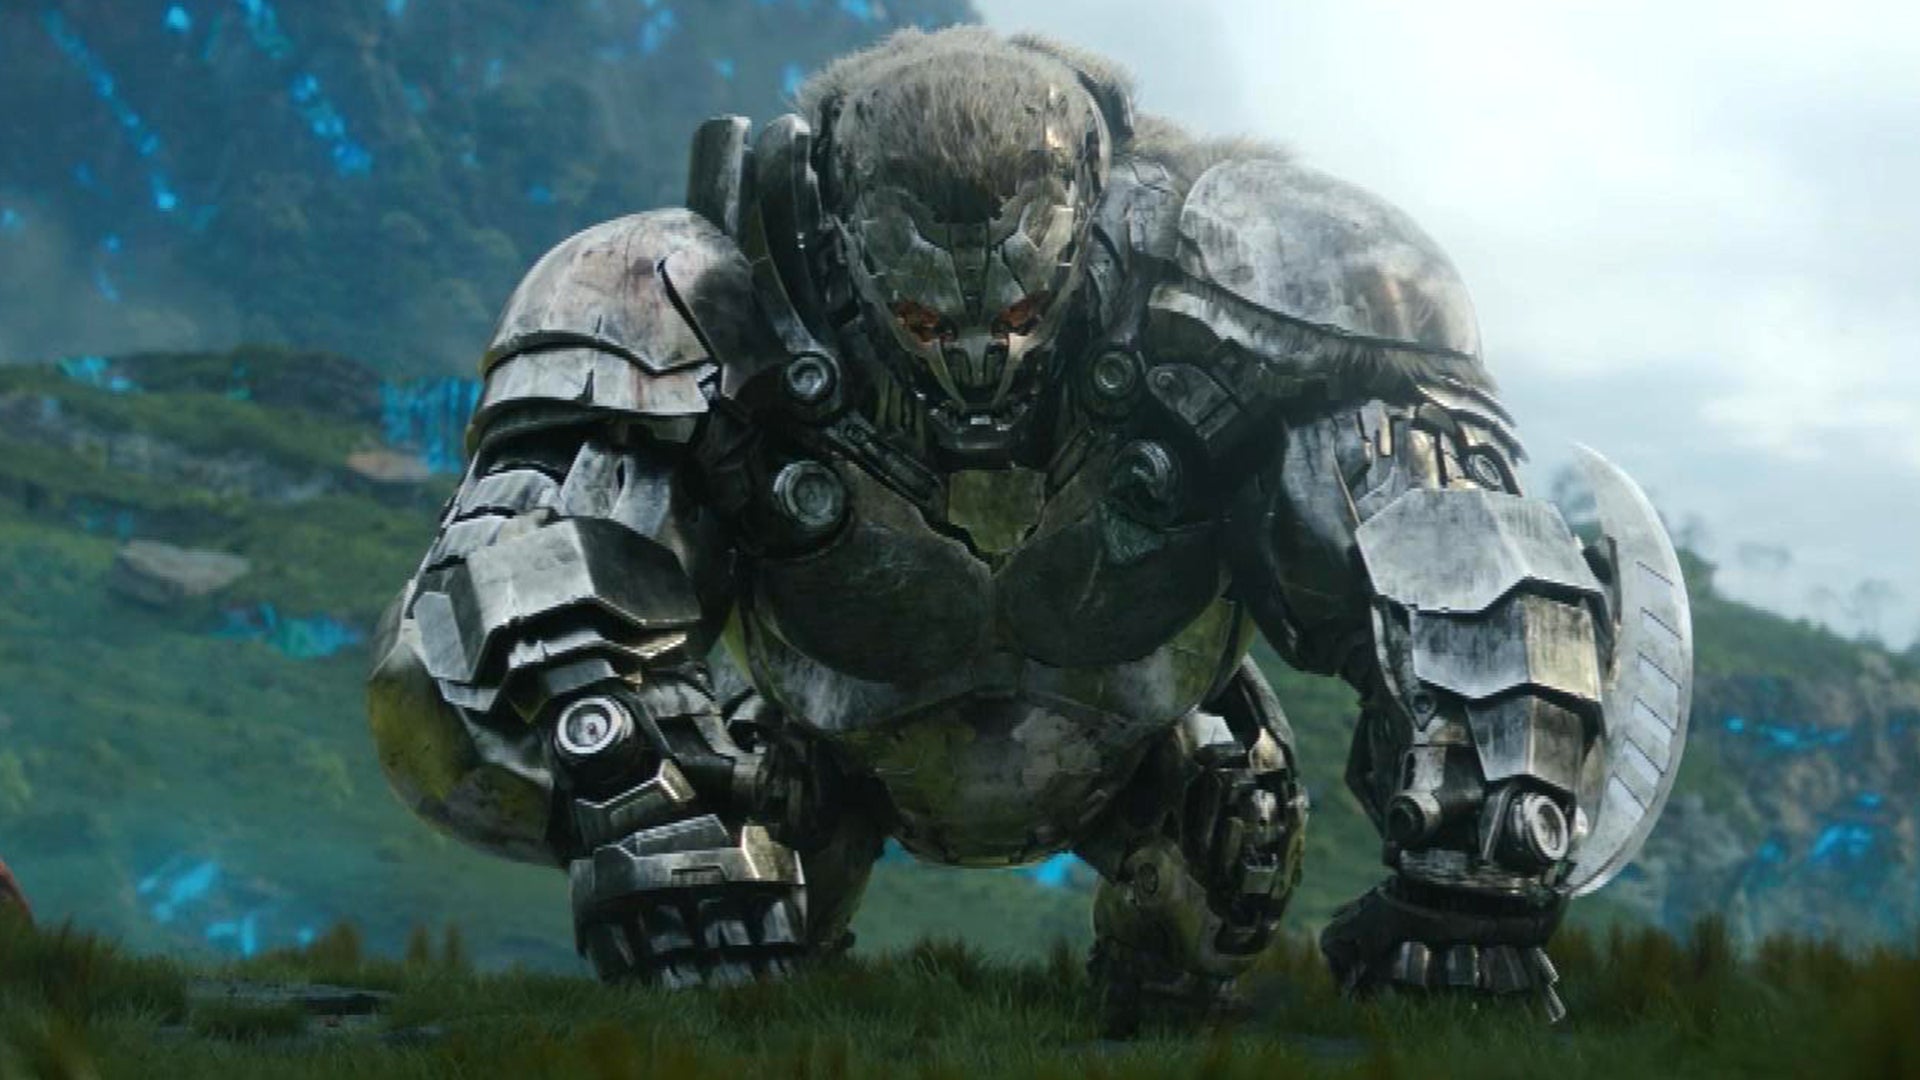 Transformers Rise Of The Beasts New Trailer Kicks Off Super Bowl LVII 2023